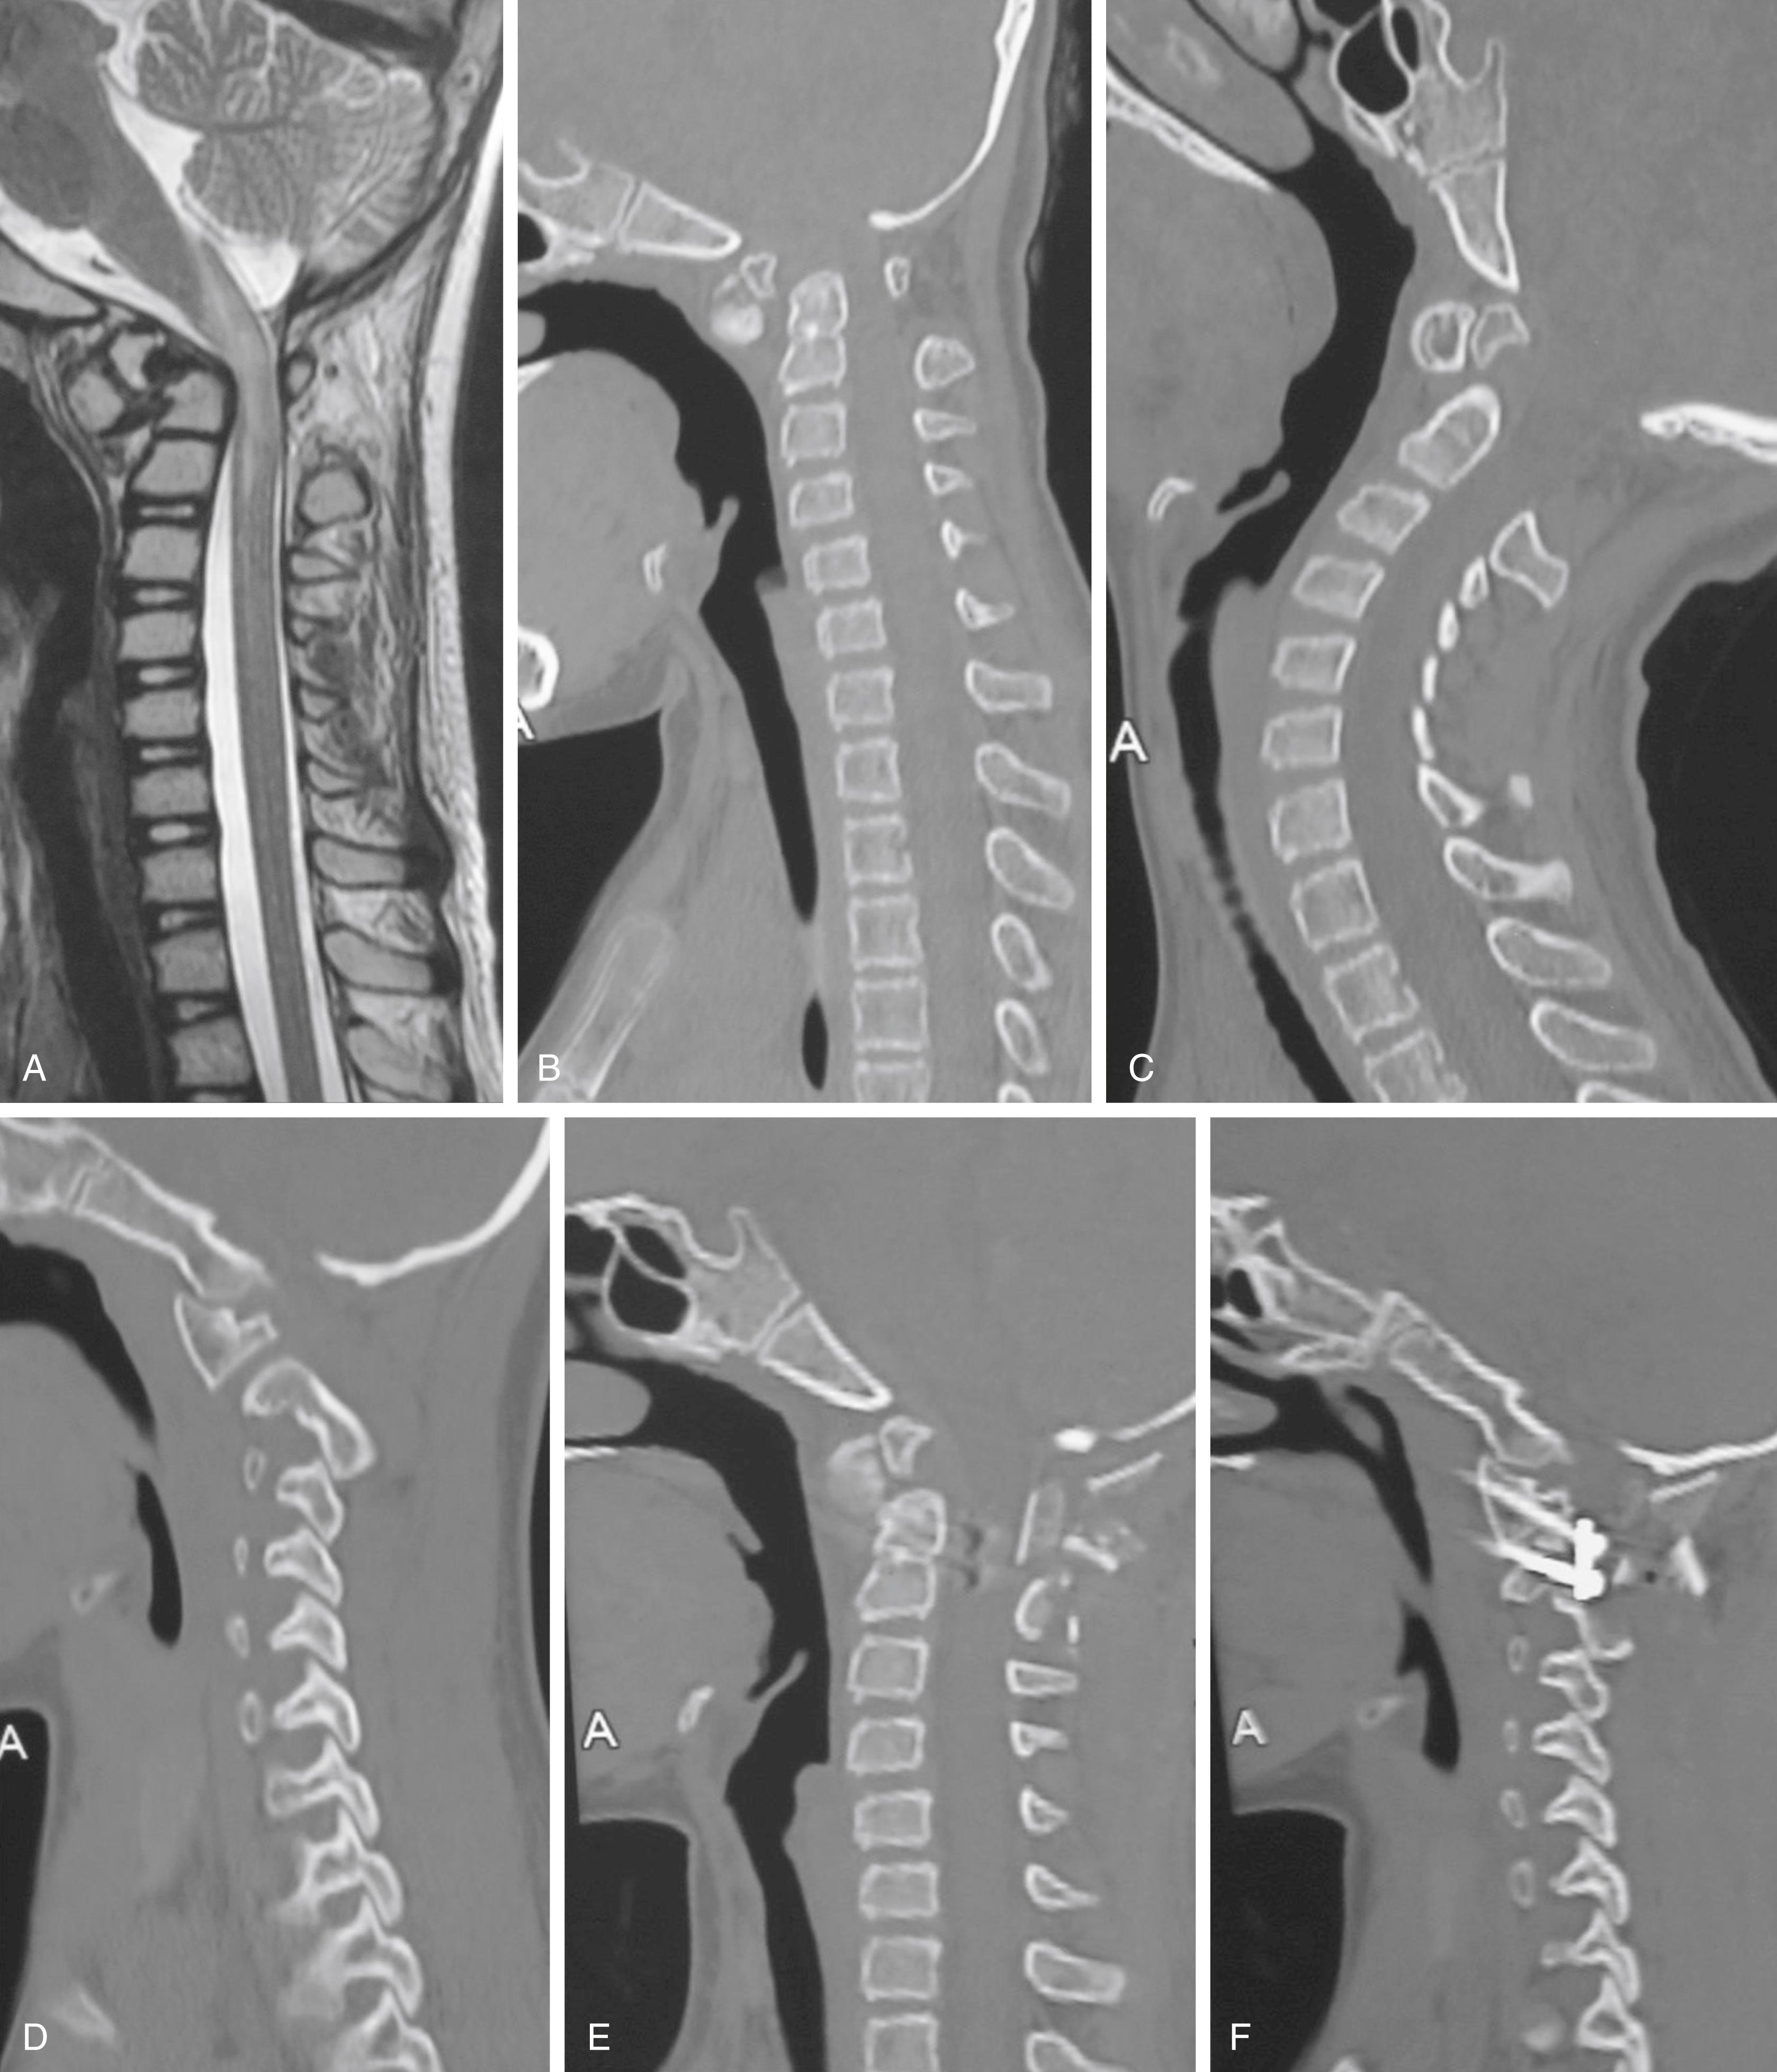 Fig. 24.1, Magnetic resonance imaging (MRI) and computed tomography (CT) images of a 10-year-old female child with atlantoaxial dislocation. A, T2-weighted MRI showing atlantoaxial dislocation and cord compression. B, CT scan with the head in flexion shows atlantoaxial dislocation. Os odontoideum can be seen. C, CT scan with the head in extension showing reduction of the dislocation. D, CT scan with the cut passing through the facets showing the type 1 facetal instability. E, Postoperative CT scan showing atlantoaxial fixation in a reduced position. F, Image showing the implants in the facets of atlas and axis.